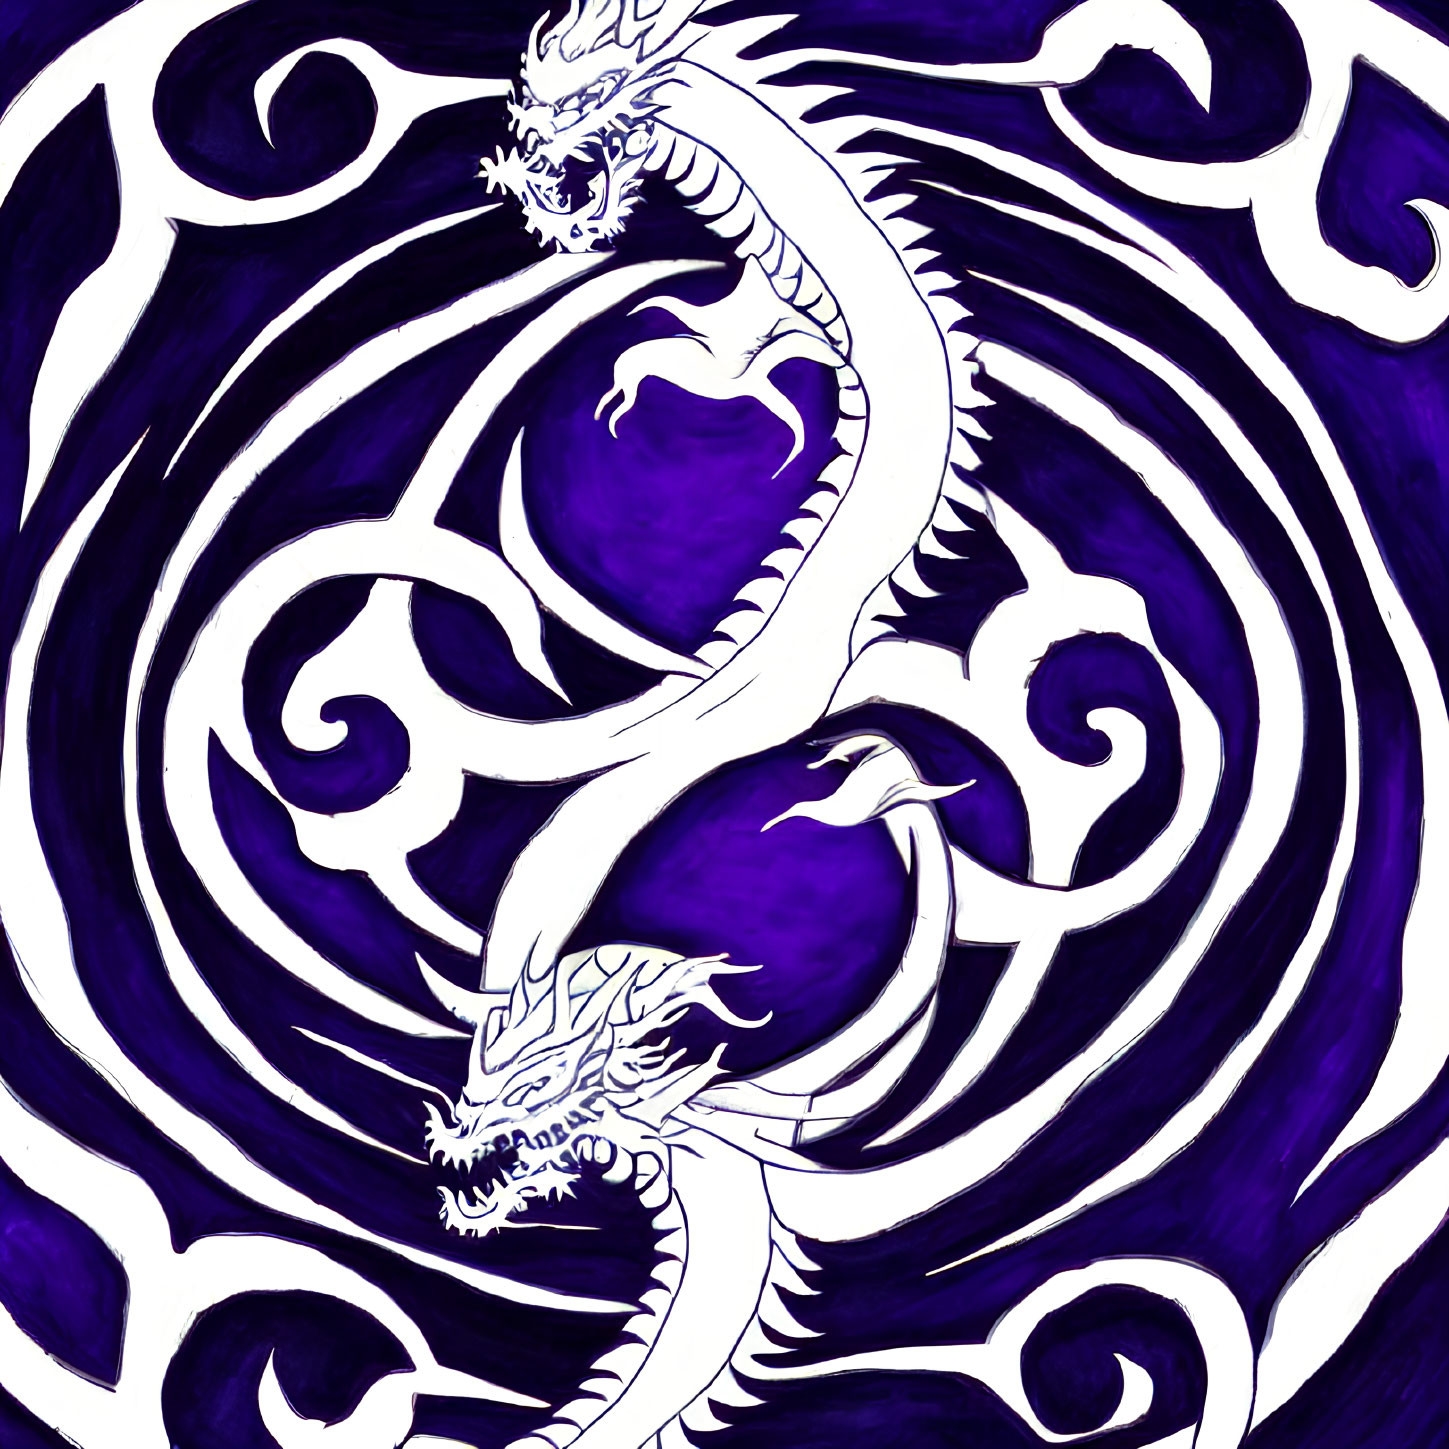 Intricate White Dragon on Swirling Purple Abstract Background